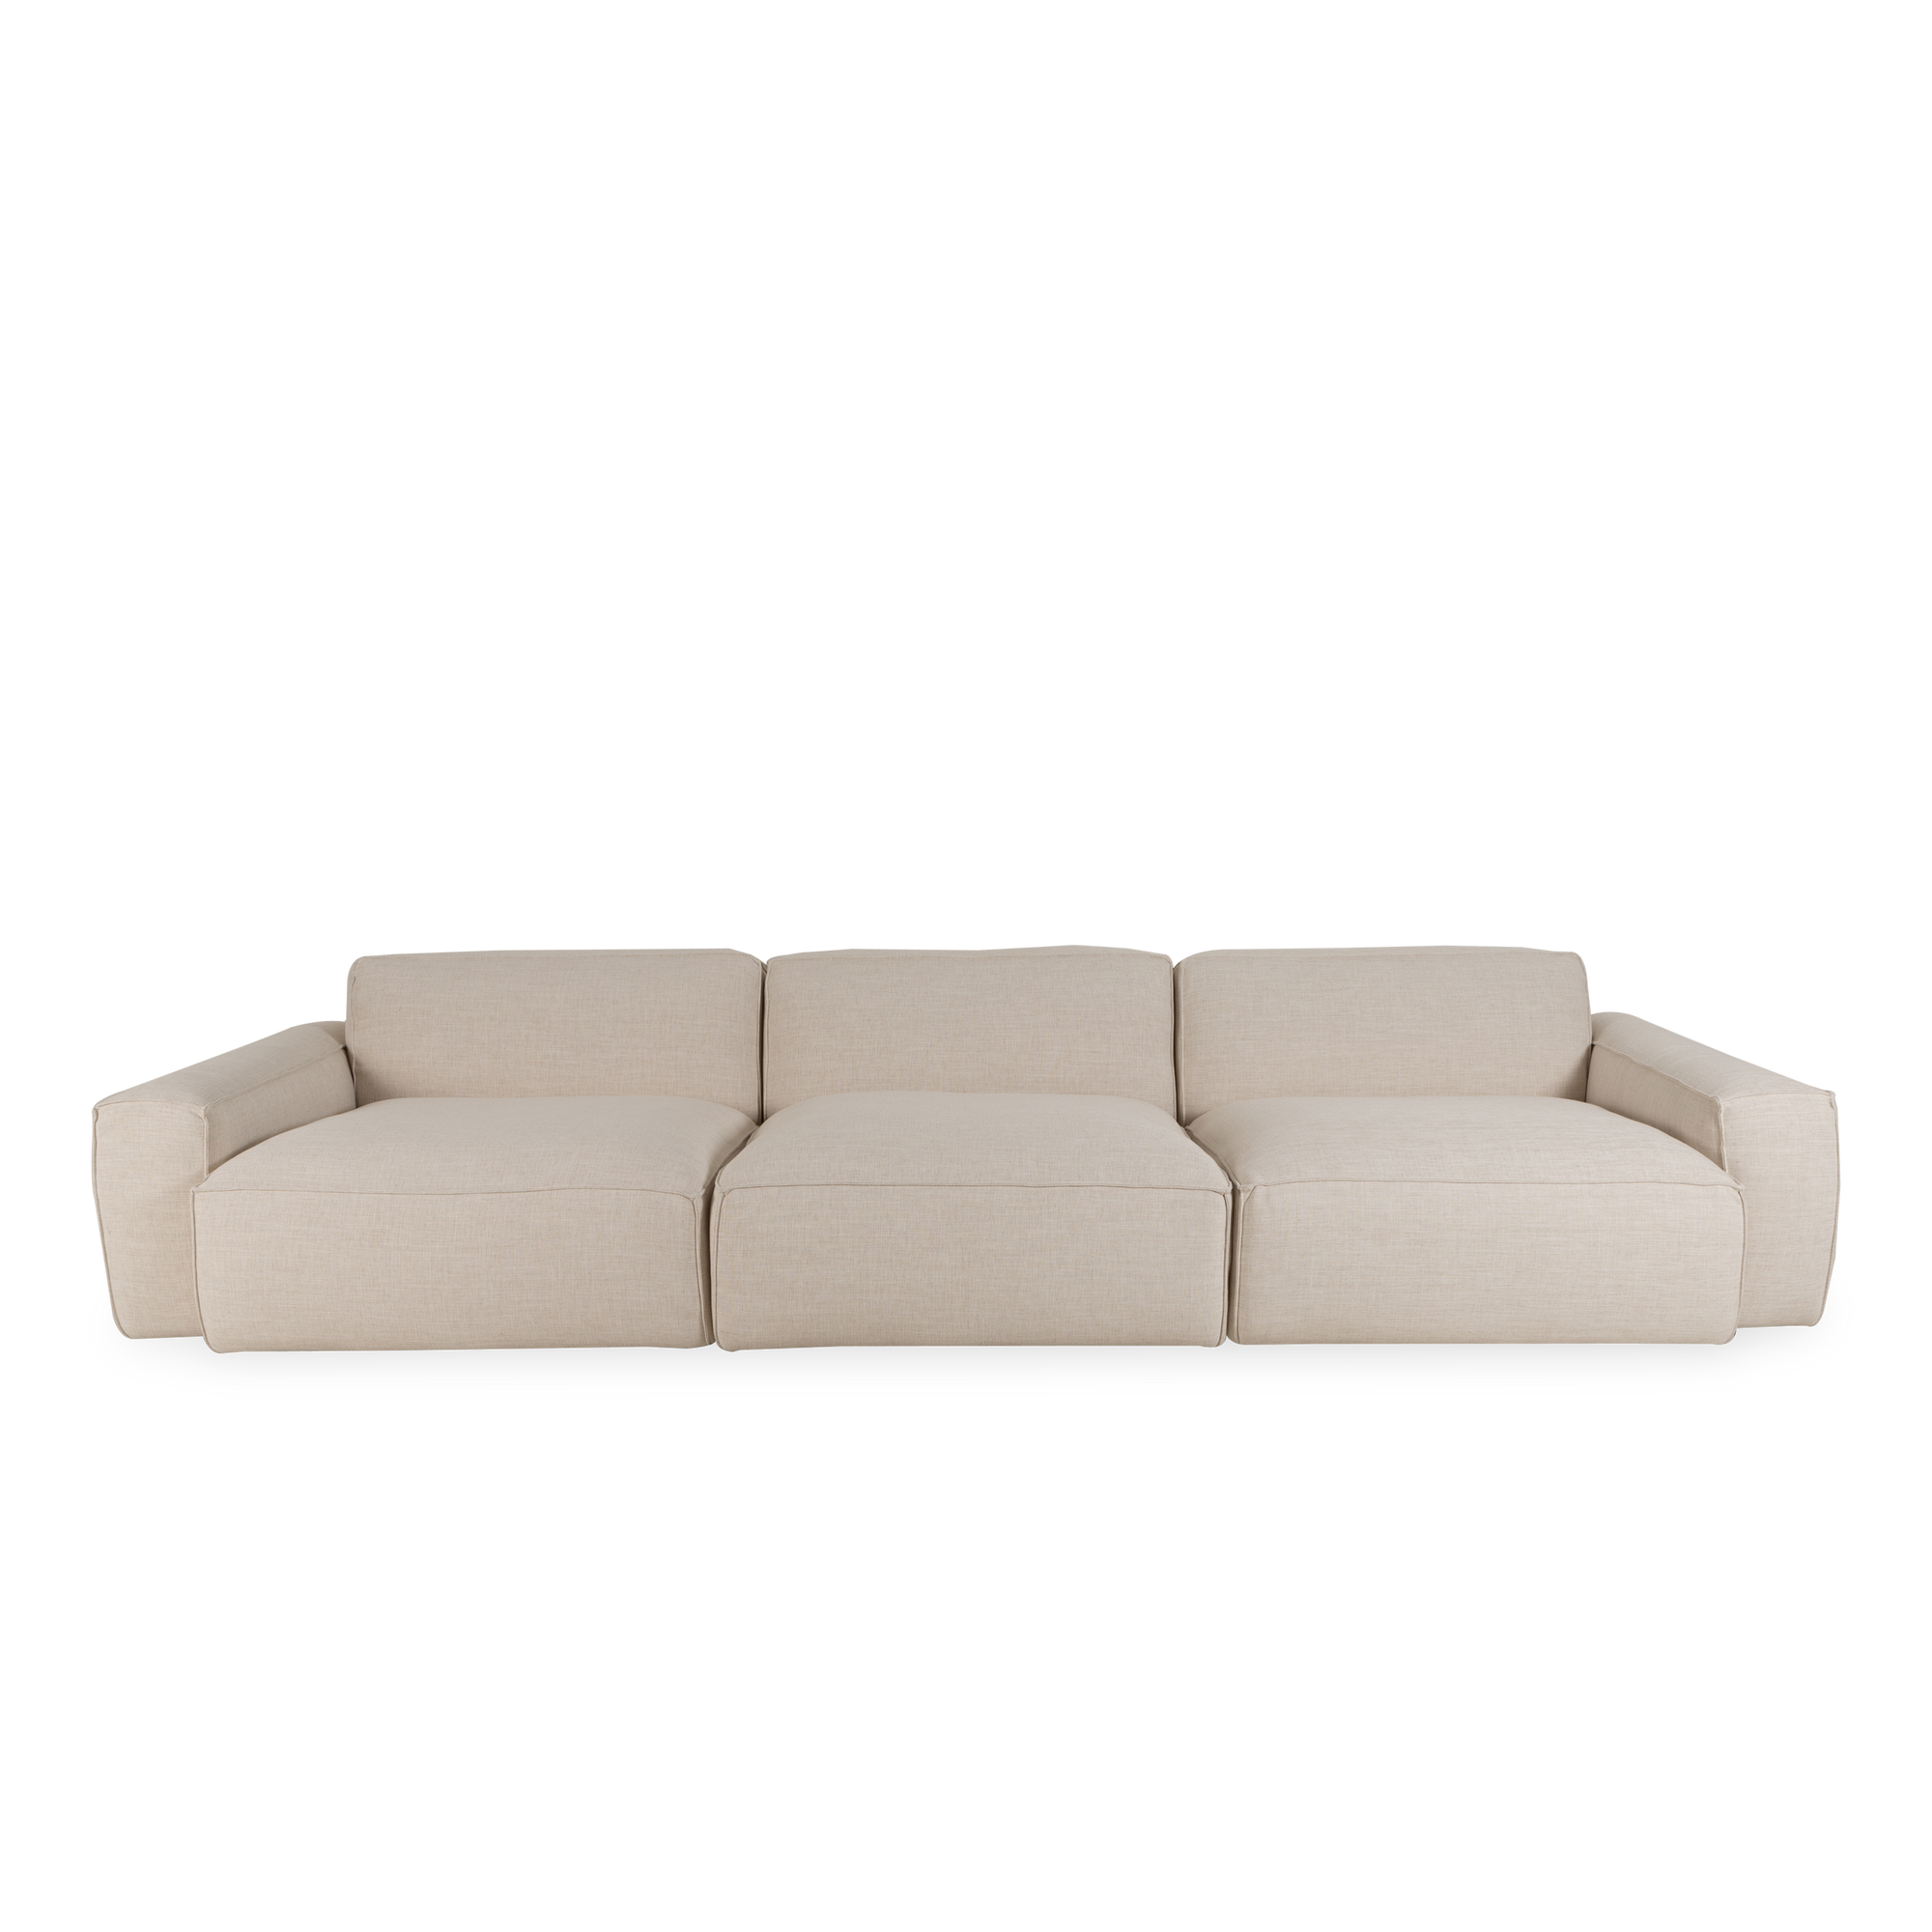 When it comes to true lounging, the Nirvana Large Modular Sectional is perfect for sitting, lying, leaning and draping in comfort.